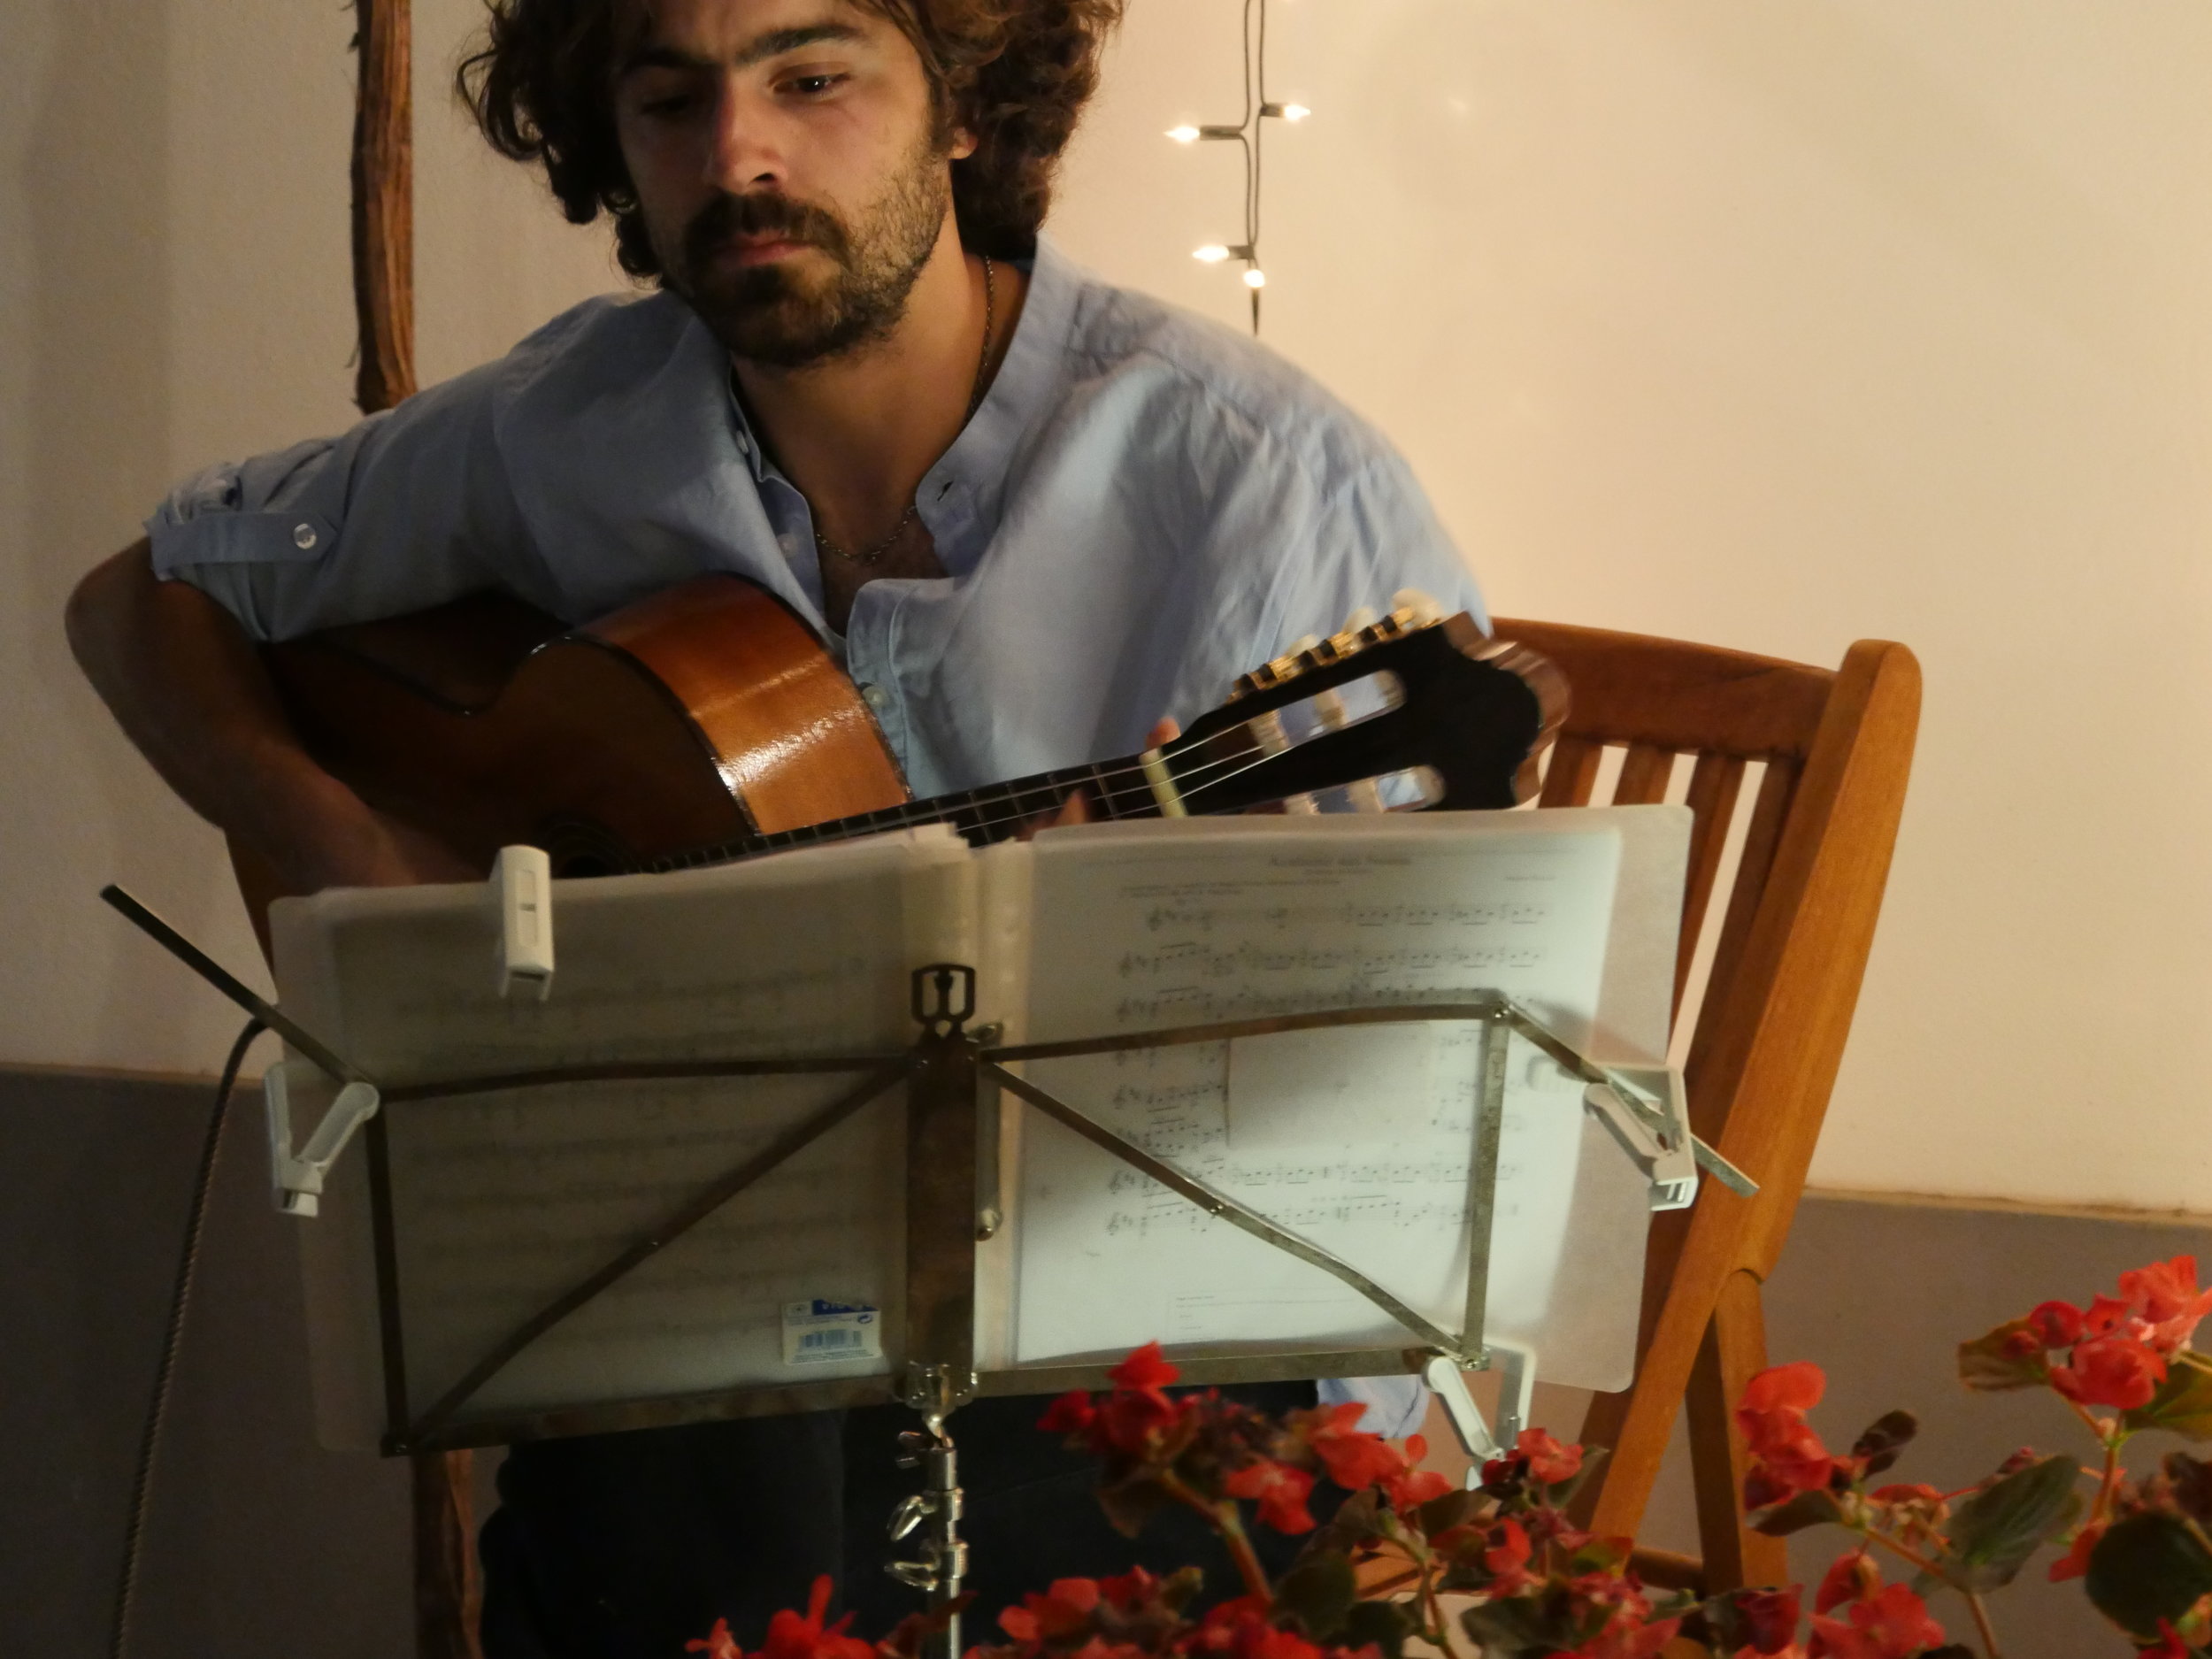  August Tedo musical evening in our courtyard - this year classical guitar with Portuguese, Brazilian and Spanish influences. 